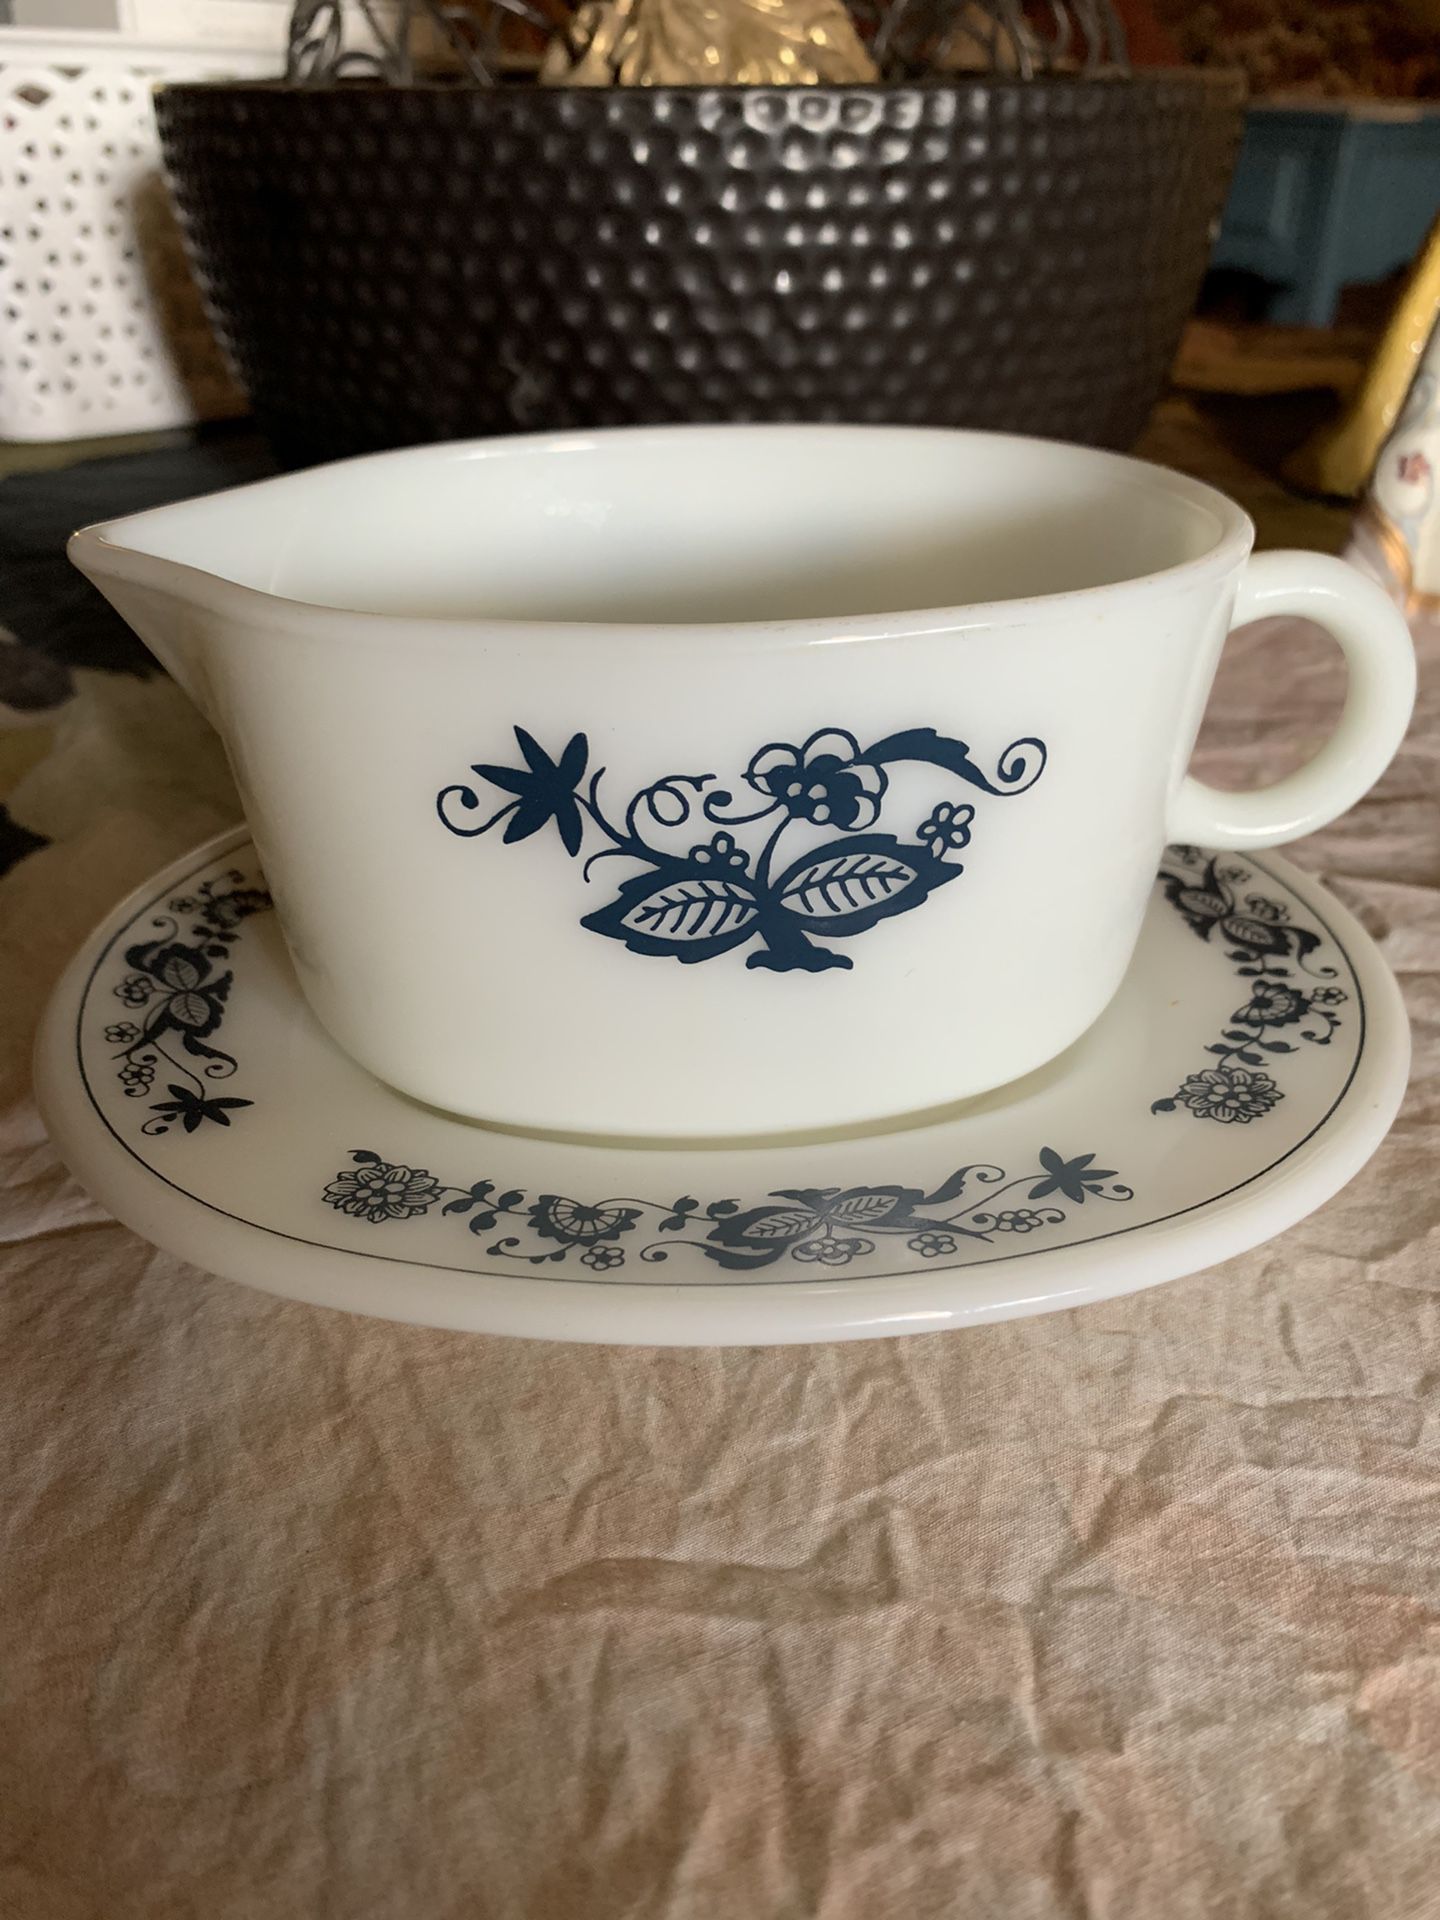 Vintage Pyrex Old Town Blue Onion Gravy Boat & Underplate 